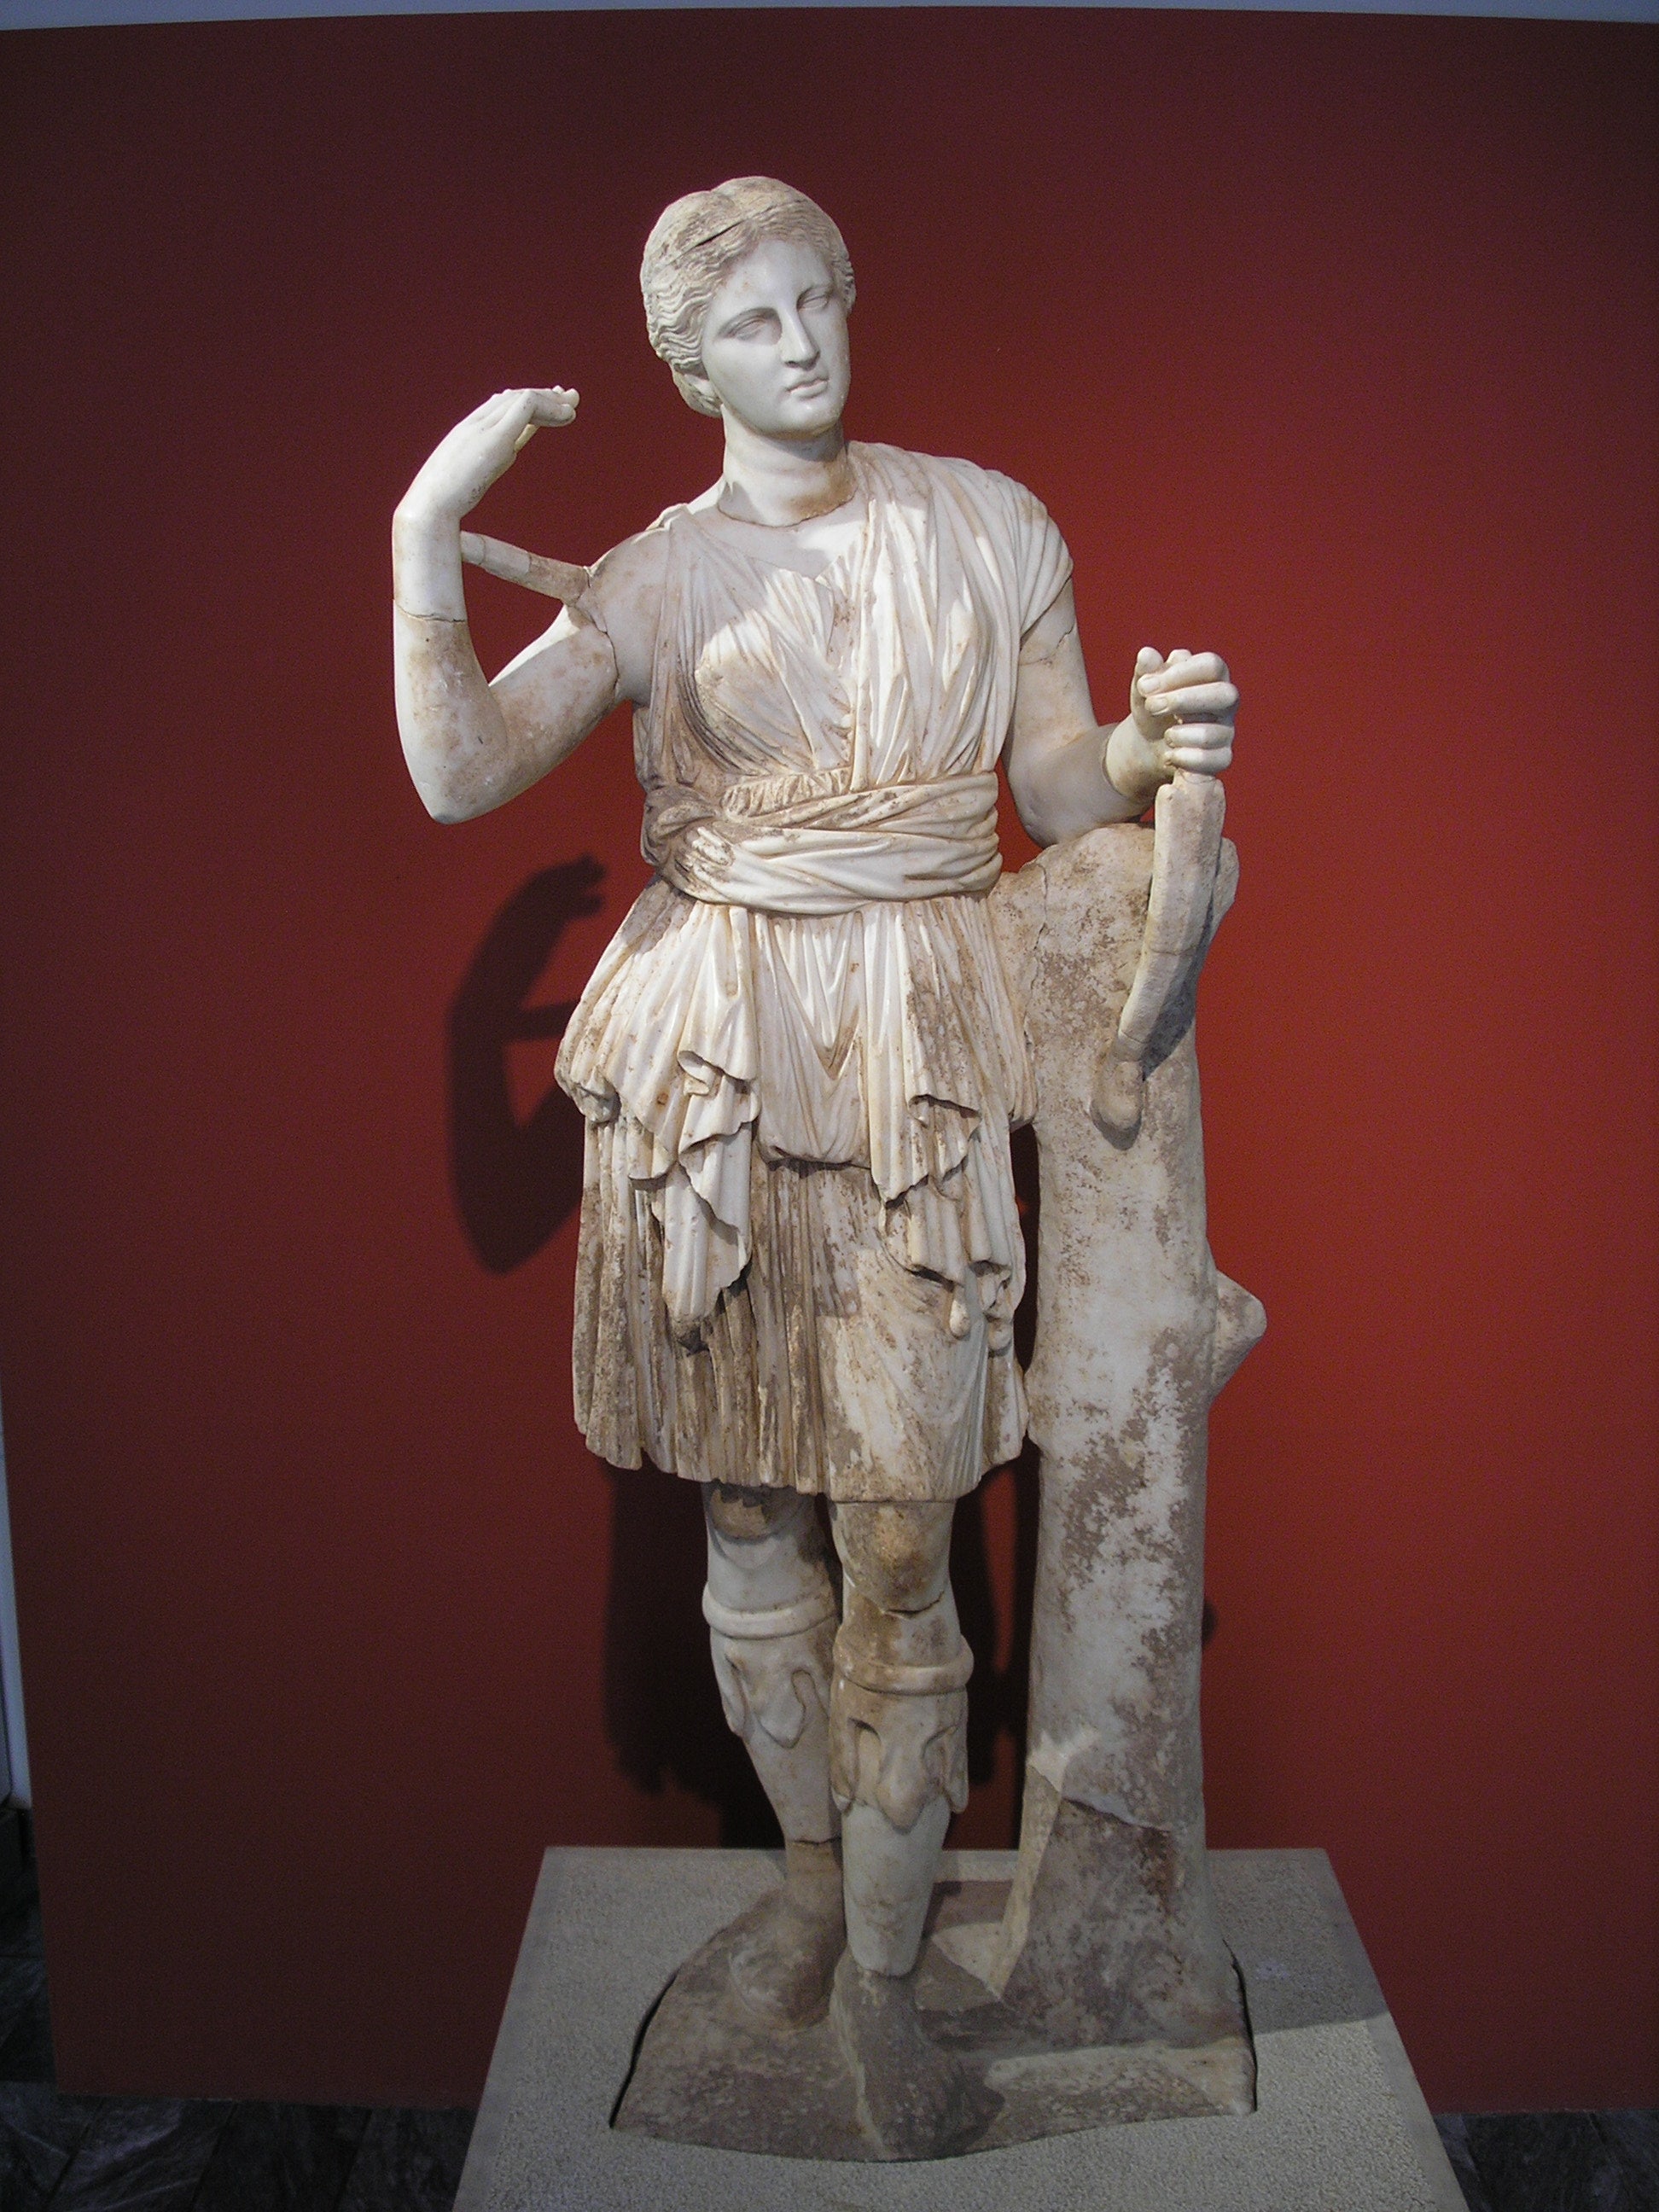 A classical marble sculpture of women in a short, Roman-style dress carrying a dagger